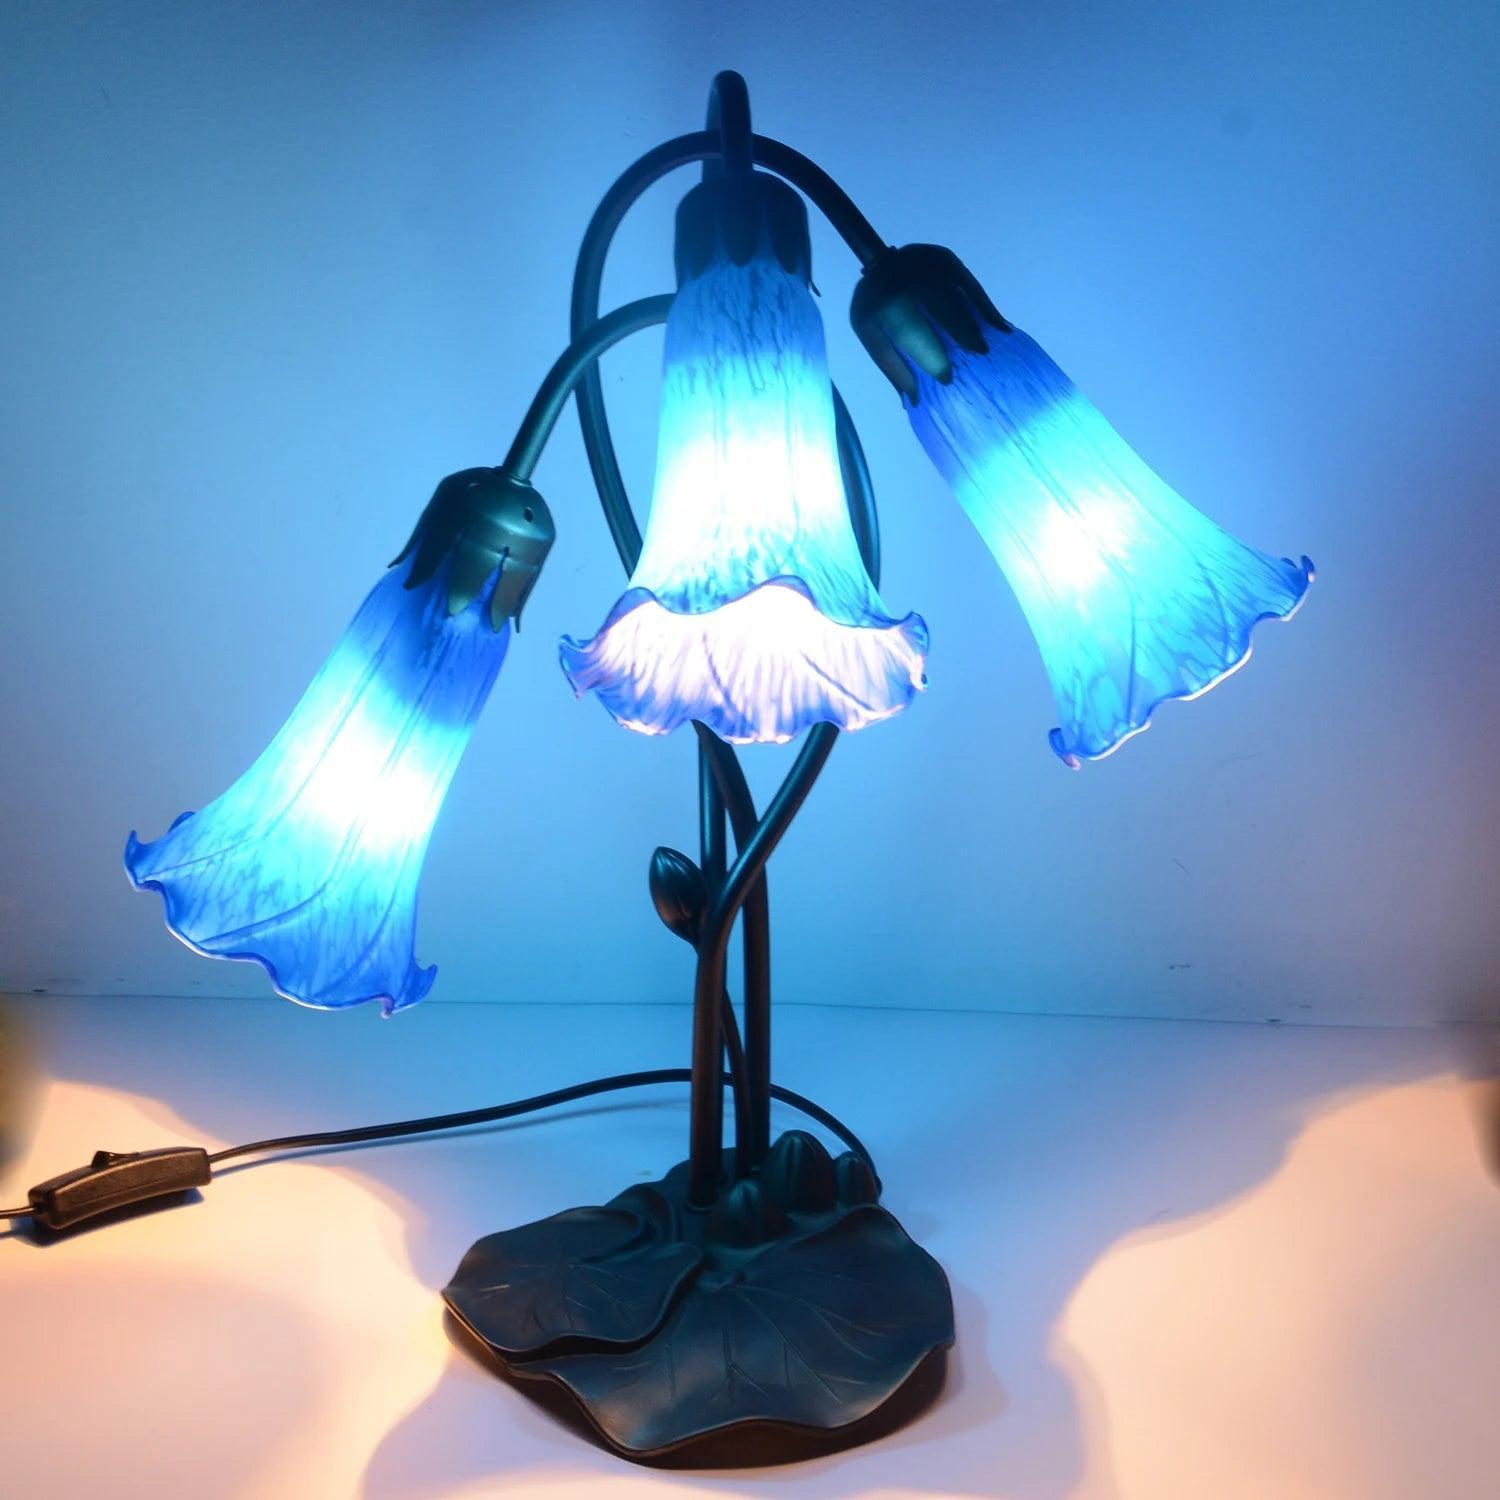 Pond Lily Lamp Shade Blue Glass Lampshade 4.5" Wide X 6" Tall X 1.5" Fitter Lighting Accessories - Specialty Shades